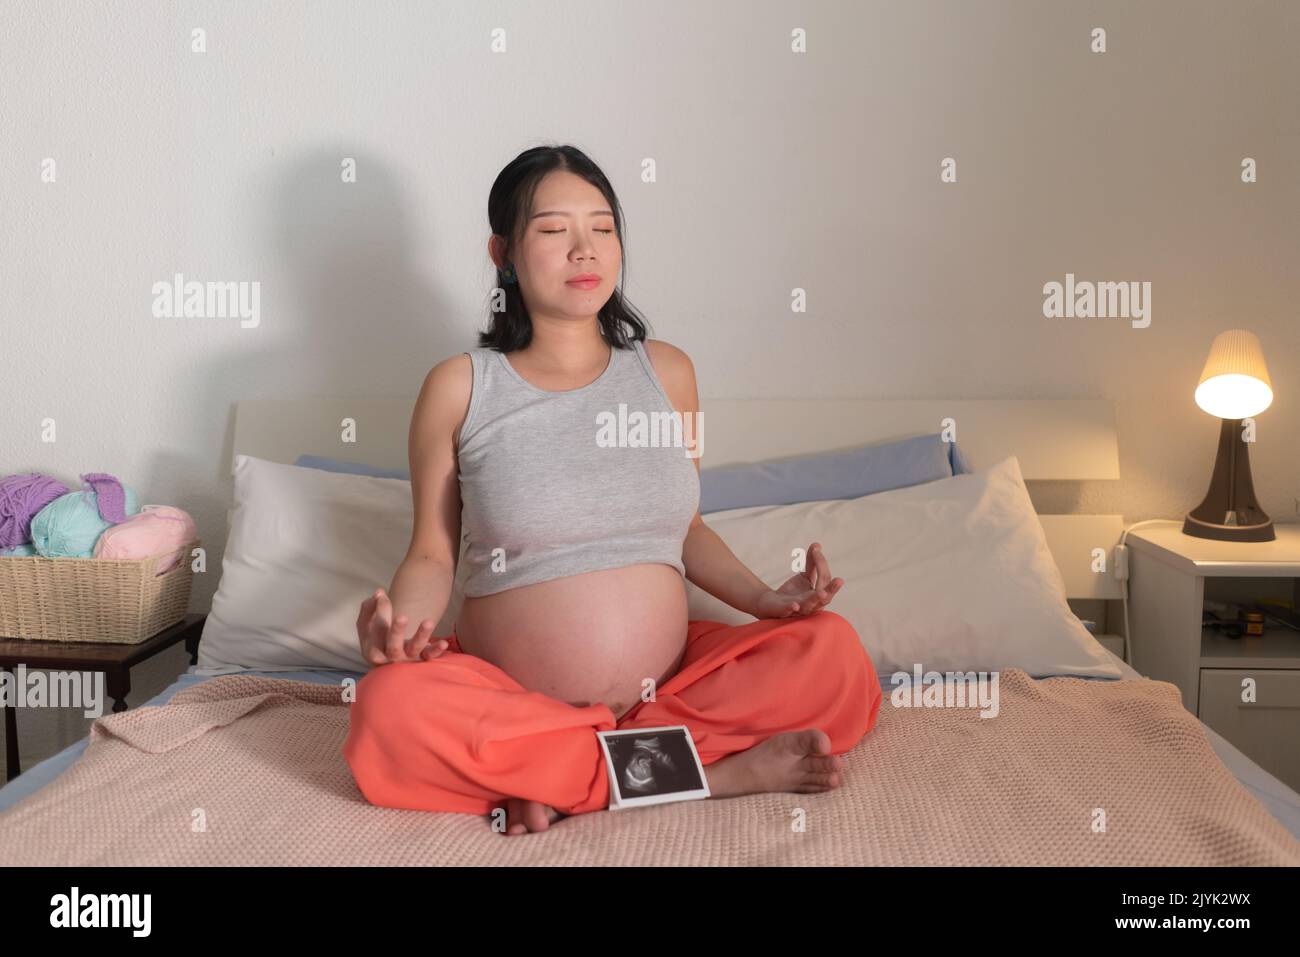 lifestyle home portrait of young happy and beautiful Asian Korean woman pregnant doing relaxing yoga exercise on bed in maternity and pregnancy concep Stock Photo